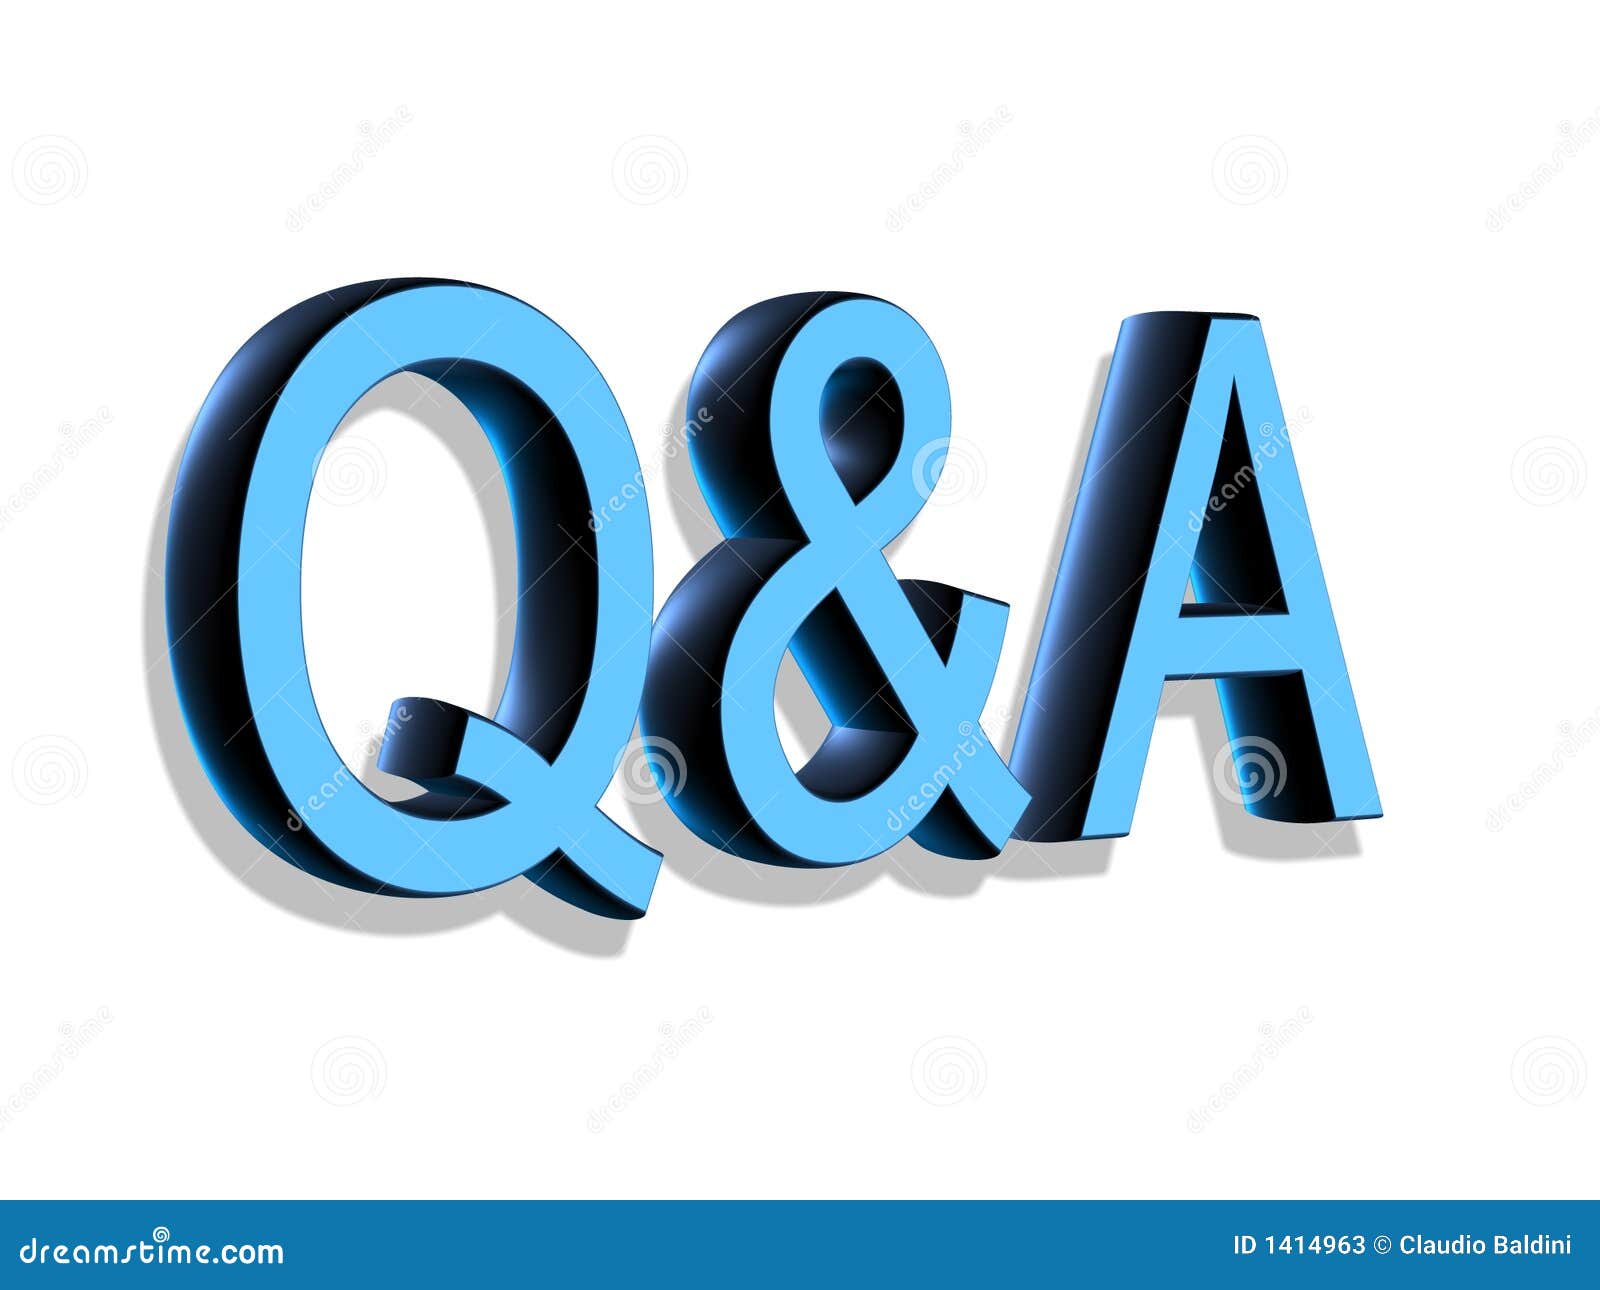 clipart for questions and answers - photo #25